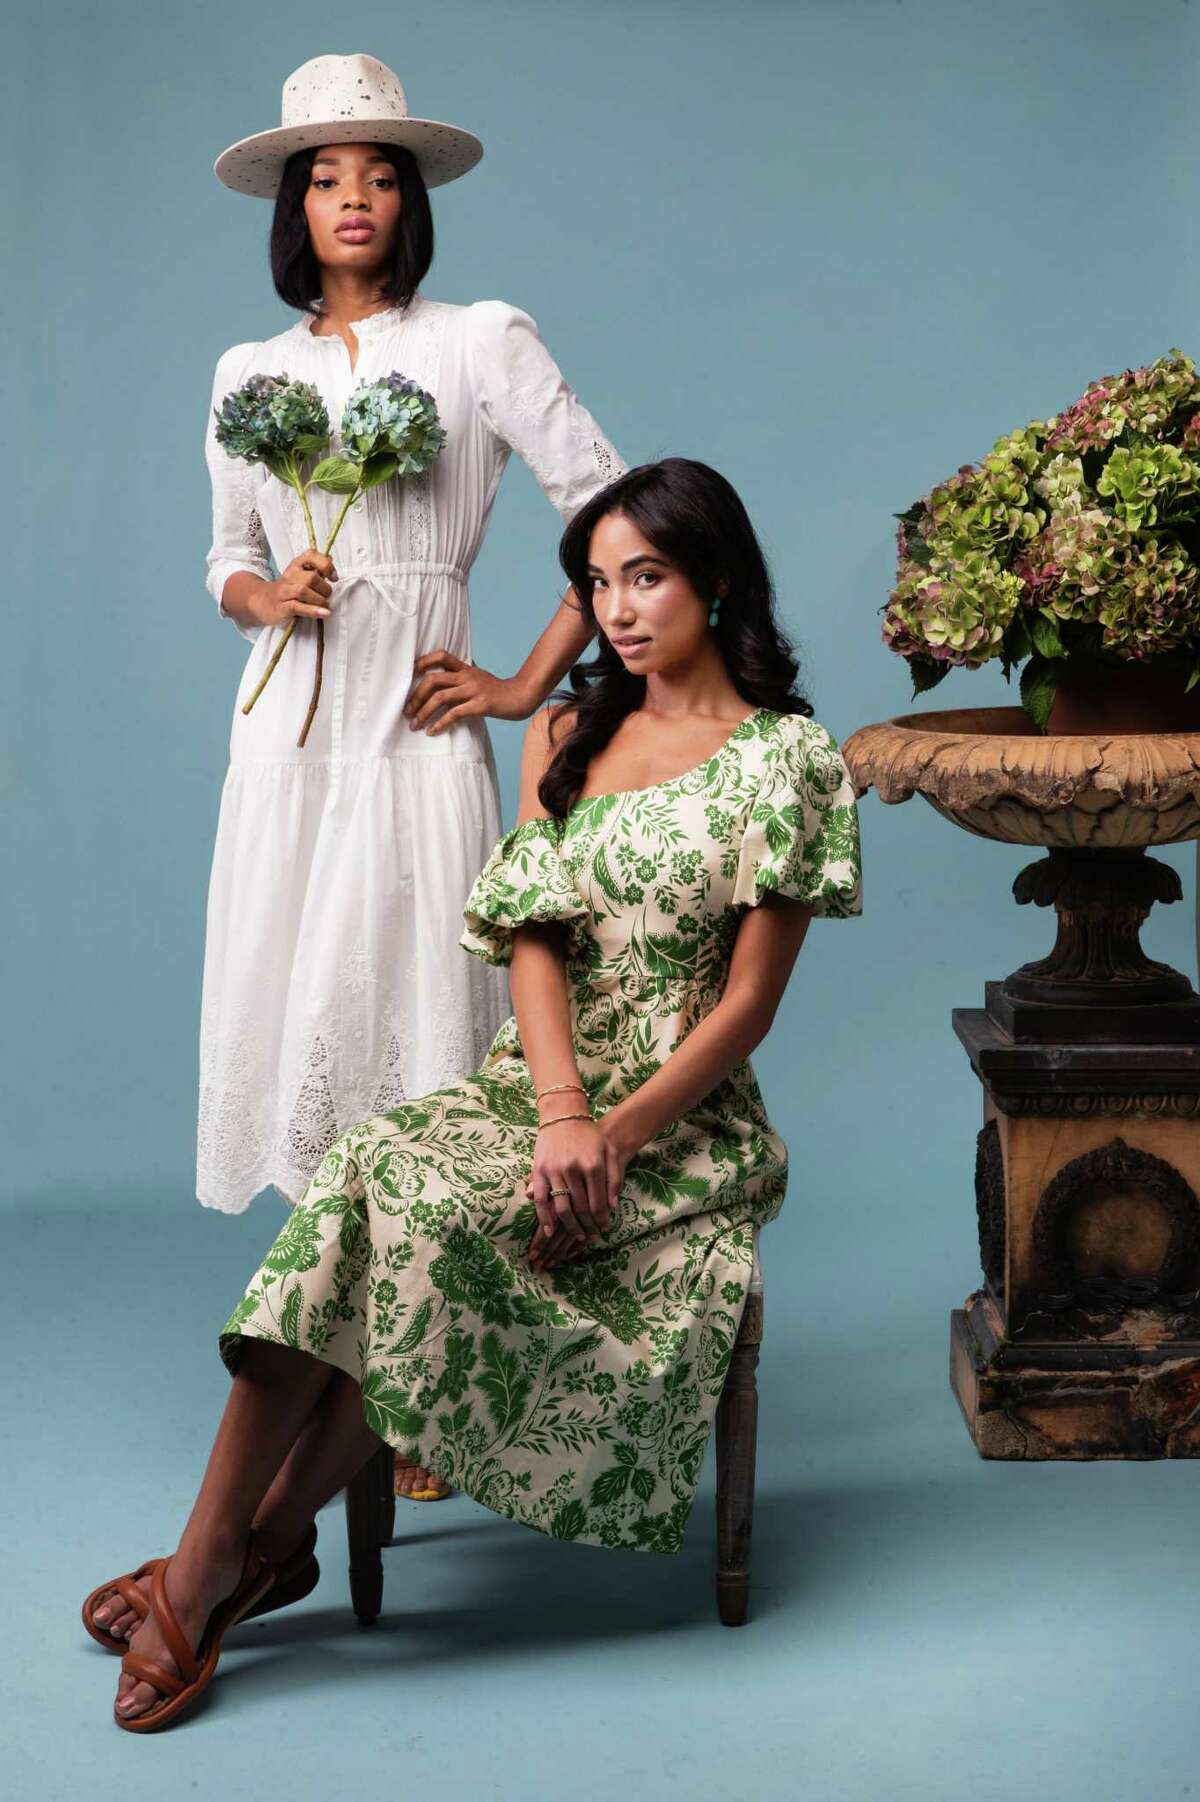 Glory, left, wears the Benedict dress, $425, by Hunter Bell; Bulan hat, $2,500, by Teressa Foglia; and Claudia heels, $495, by Aera. Gabriella wears the Magnolia dress, $475, by Hunter Bell; Gina sandals, $425, by Aera. Her Tina earrings, $1,850; Alyssa ring, $450; Marilyn ring, $600; Emily bangle, $1,450, and Nina bracelet, $500, are all by Christina Greene.